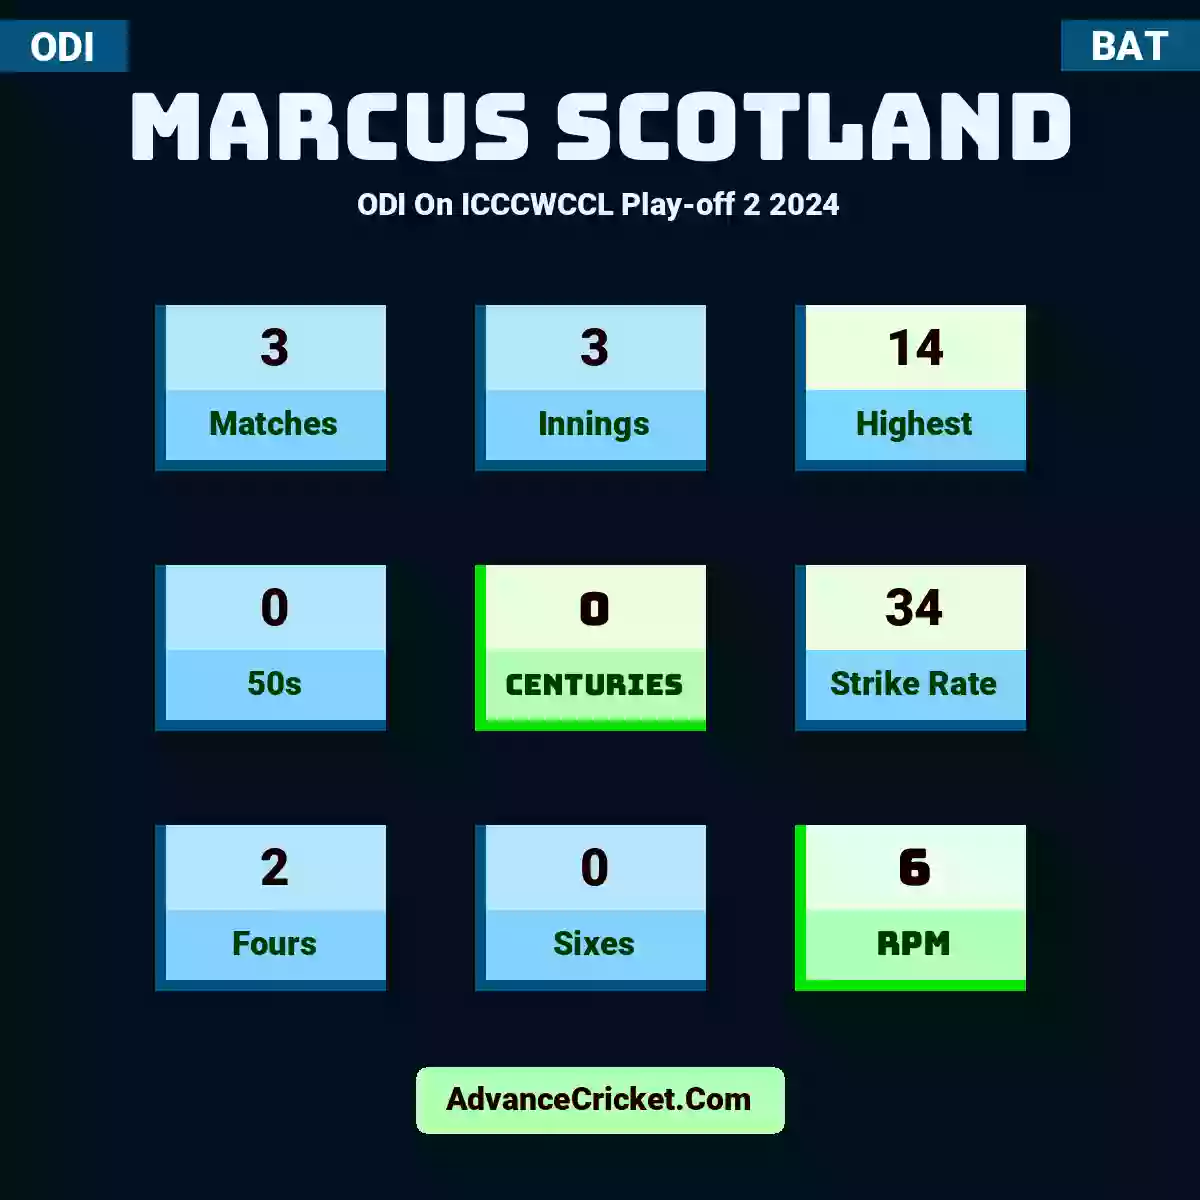 Marcus Scotland ODI  On ICCCWCCL Play-off 2 2024, Marcus Scotland played 3 matches, scored 14 runs as highest, 0 half-centuries, and 0 centuries, with a strike rate of 34. M.Scotland hit 2 fours and 0 sixes, with an RPM of 6.